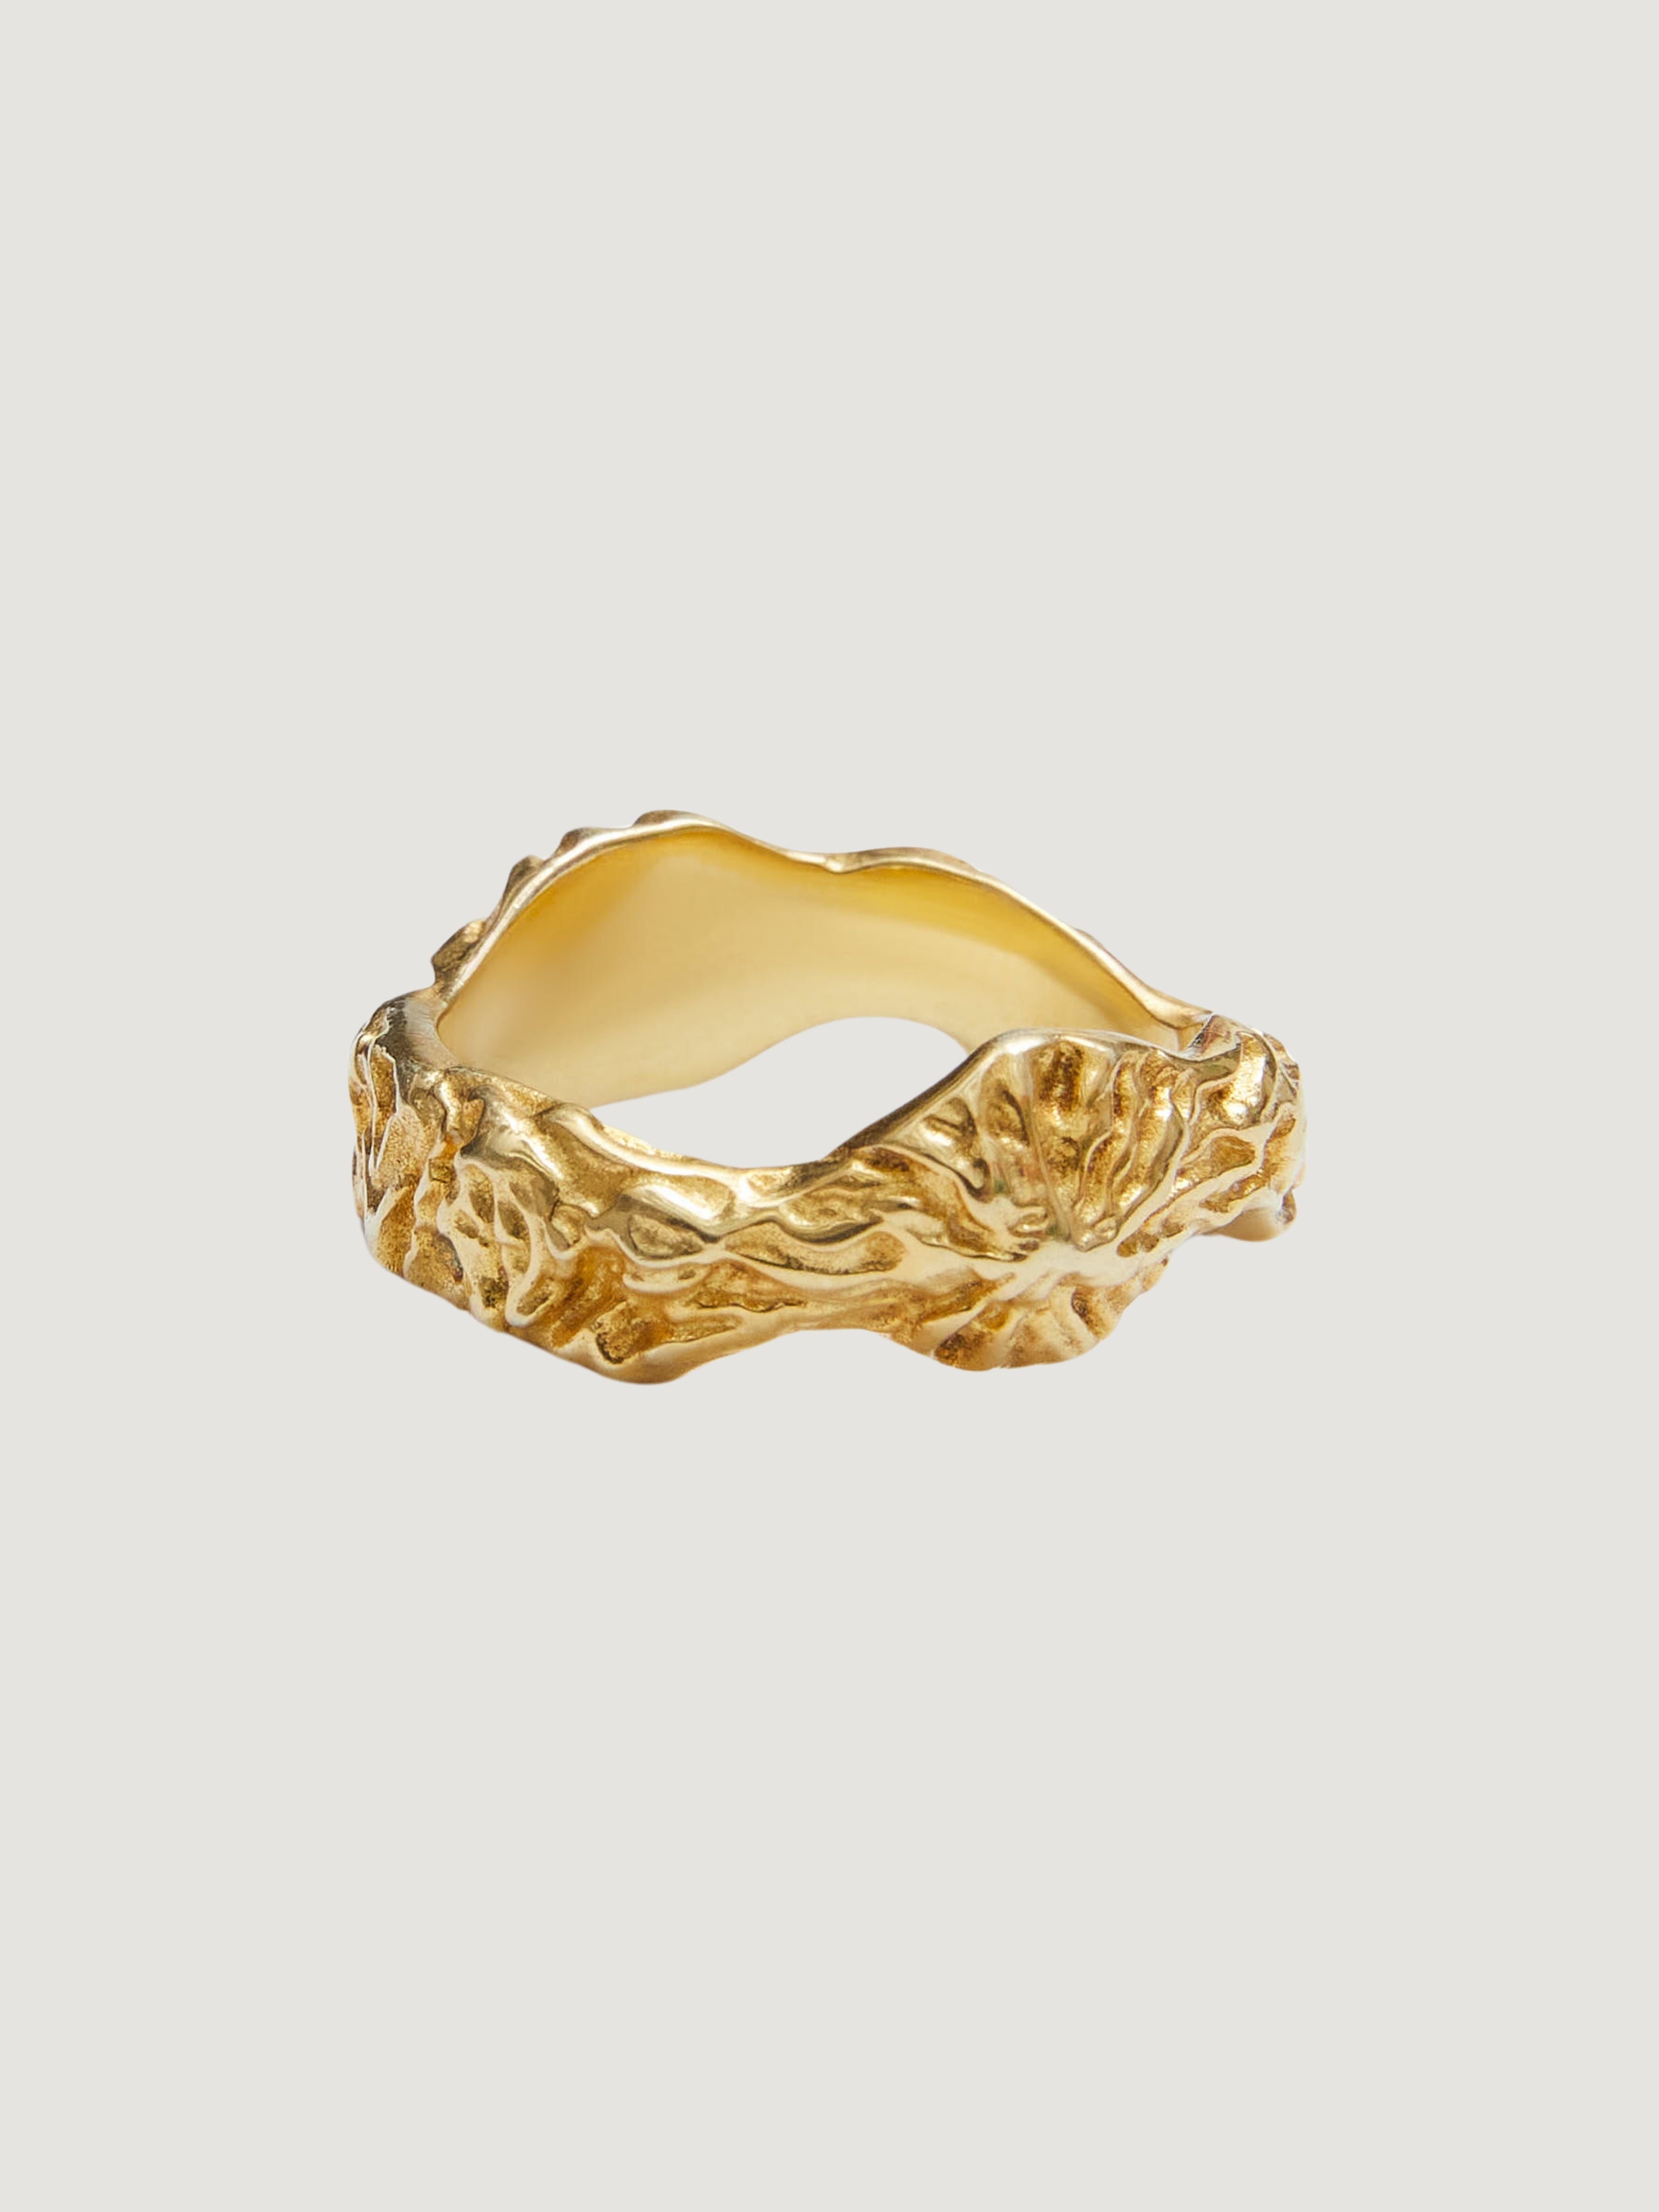 LARGE EVERYDAY RING GOLD - ATTODE